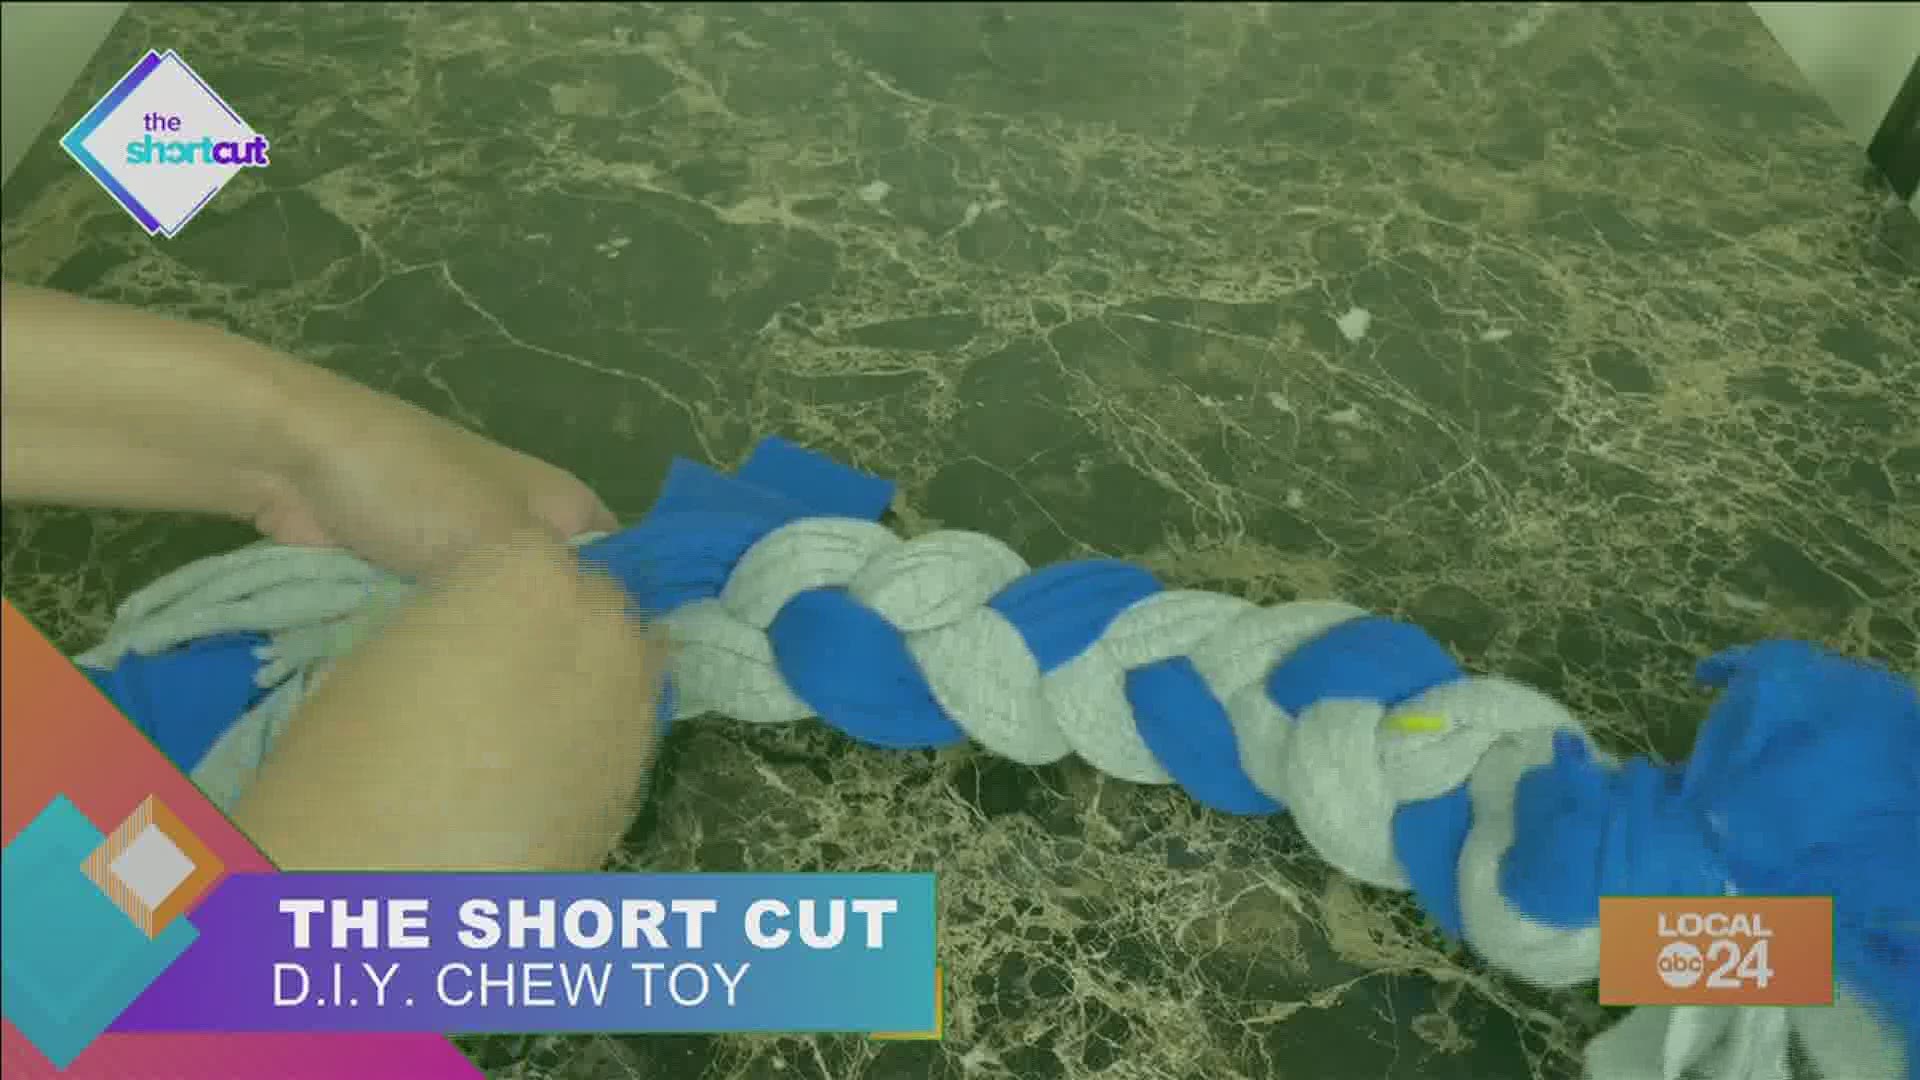 Looking to save money on dog toys and give your old t-shirts a second life? Make this DIY dog chew rope with Sydney Neely on "The Shortcut!"